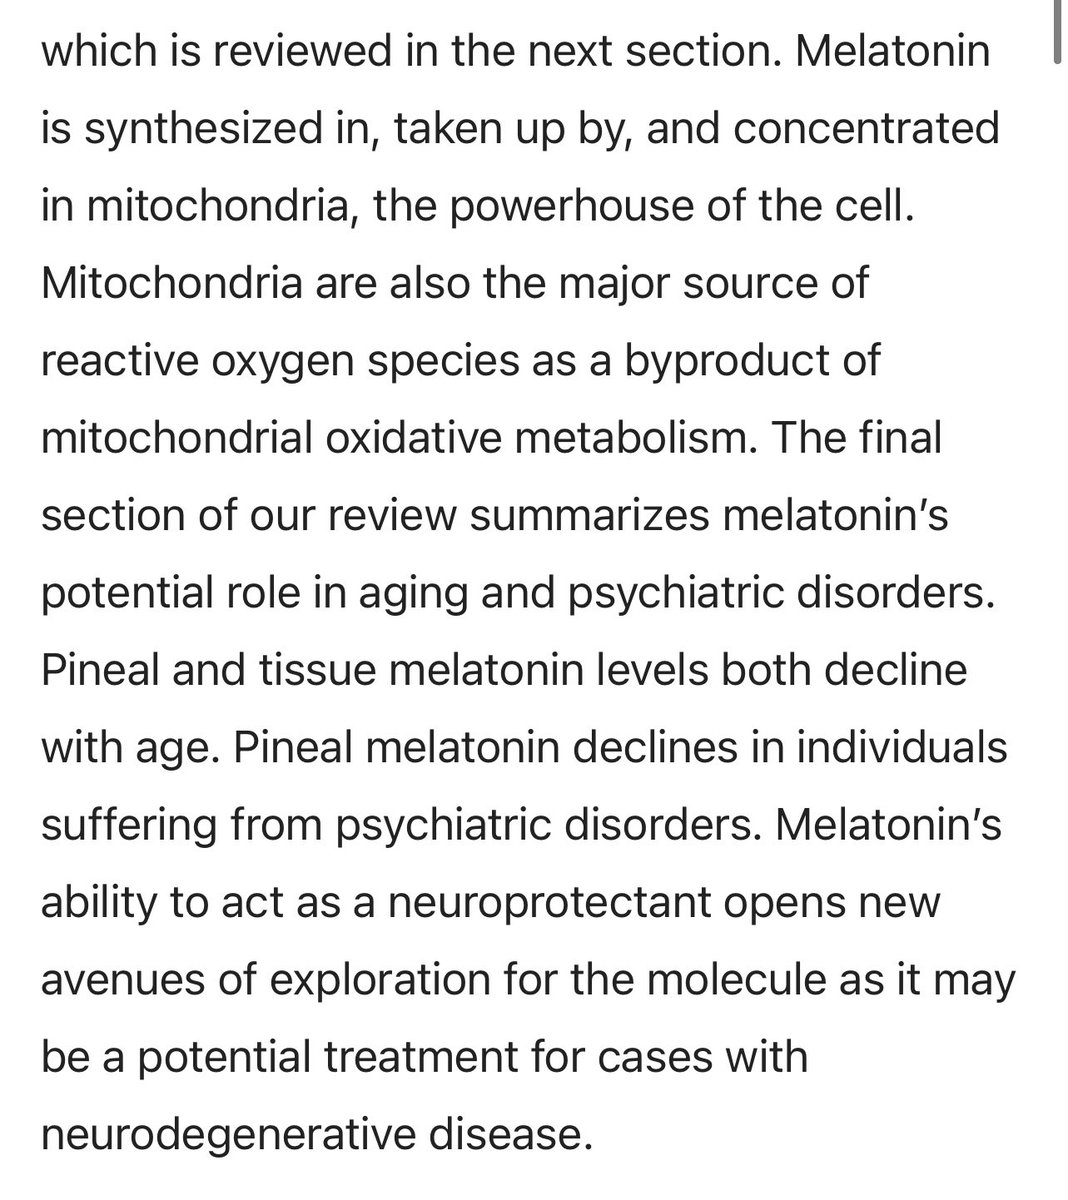 Melatonin’s neuroprotective role in mitochondria and its potential as a biomarker in aging, cognition and psychiatric disorders  https://www.nature.com/articles/s41398-021-01464-xLack of sunlight (melatonin = light hormone) and excessive artificial light at night lends to aging and neurodegeneration.